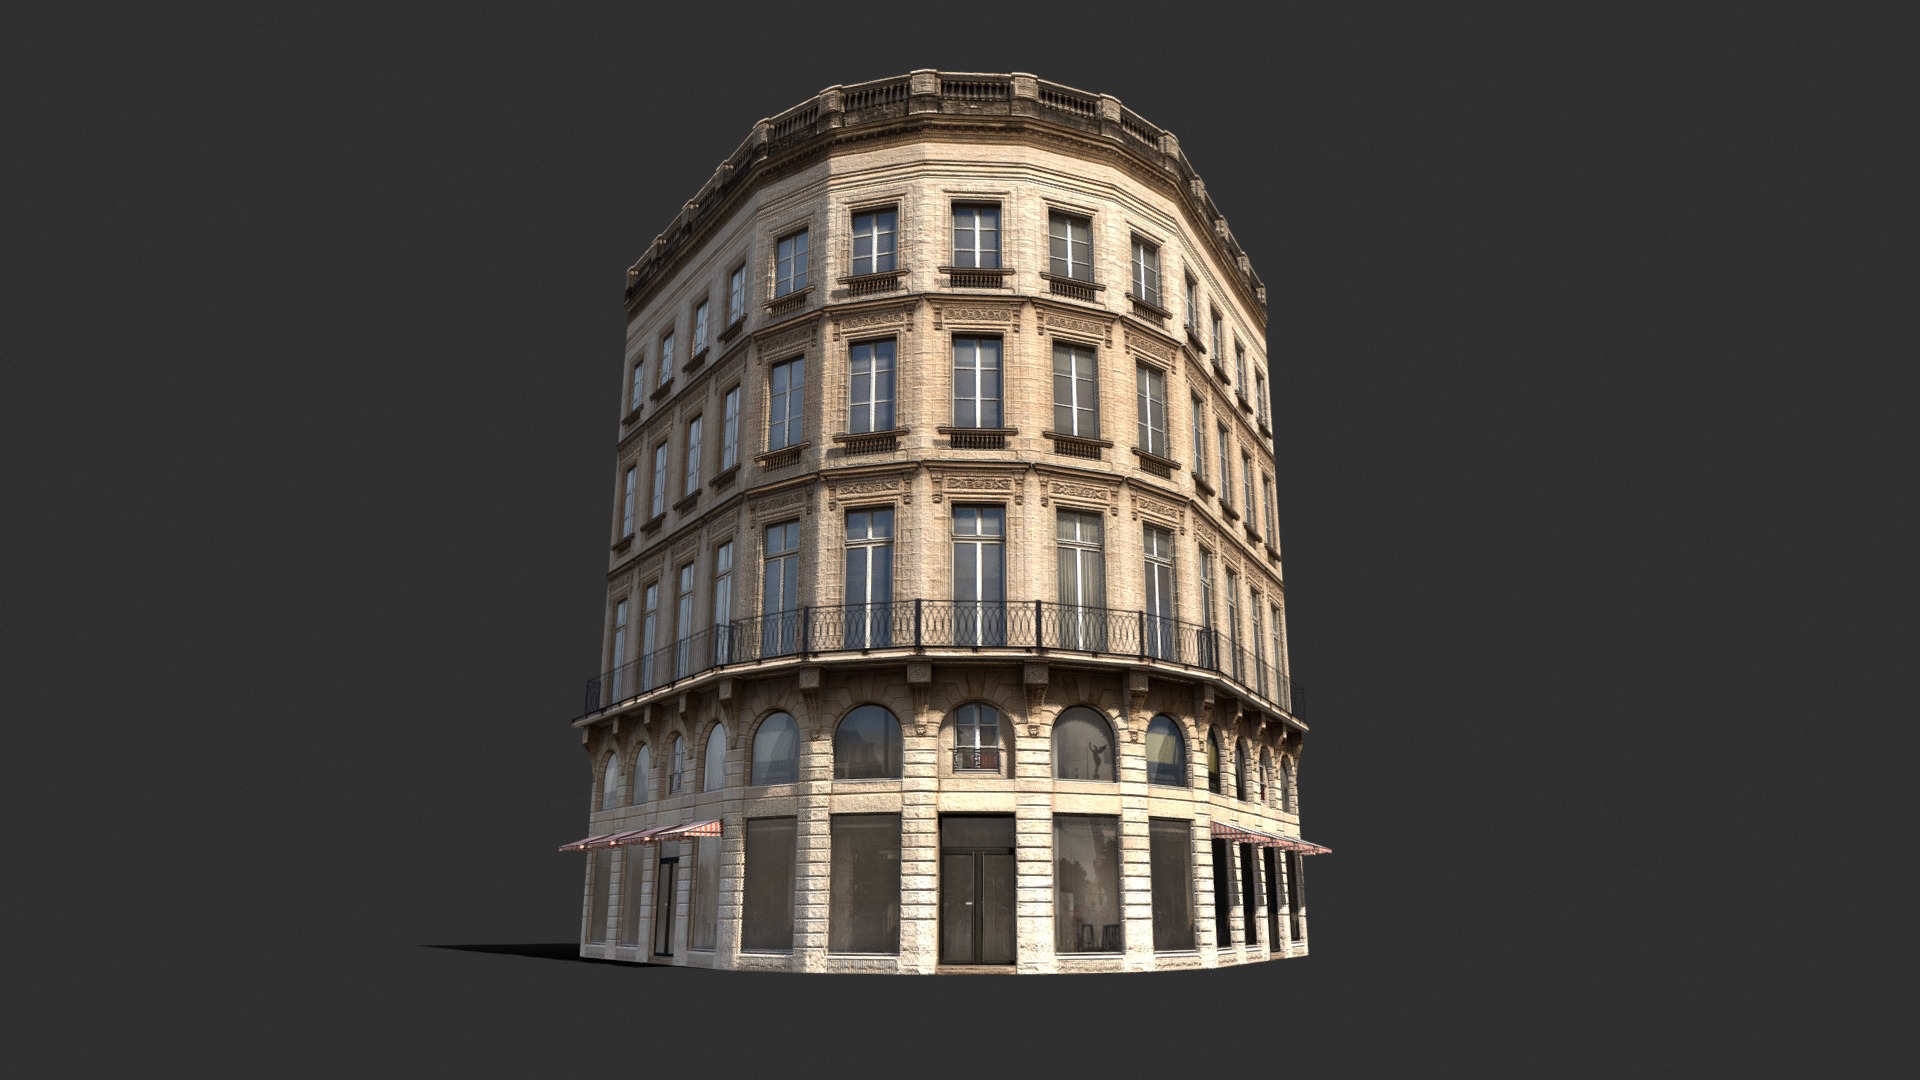 3D model Apartment House #108 Low poly 3d Model - This is a 3D model of the Apartment House #108 Low poly 3d Model. The 3D model is about Leaning Tower of Pisa with a tower.